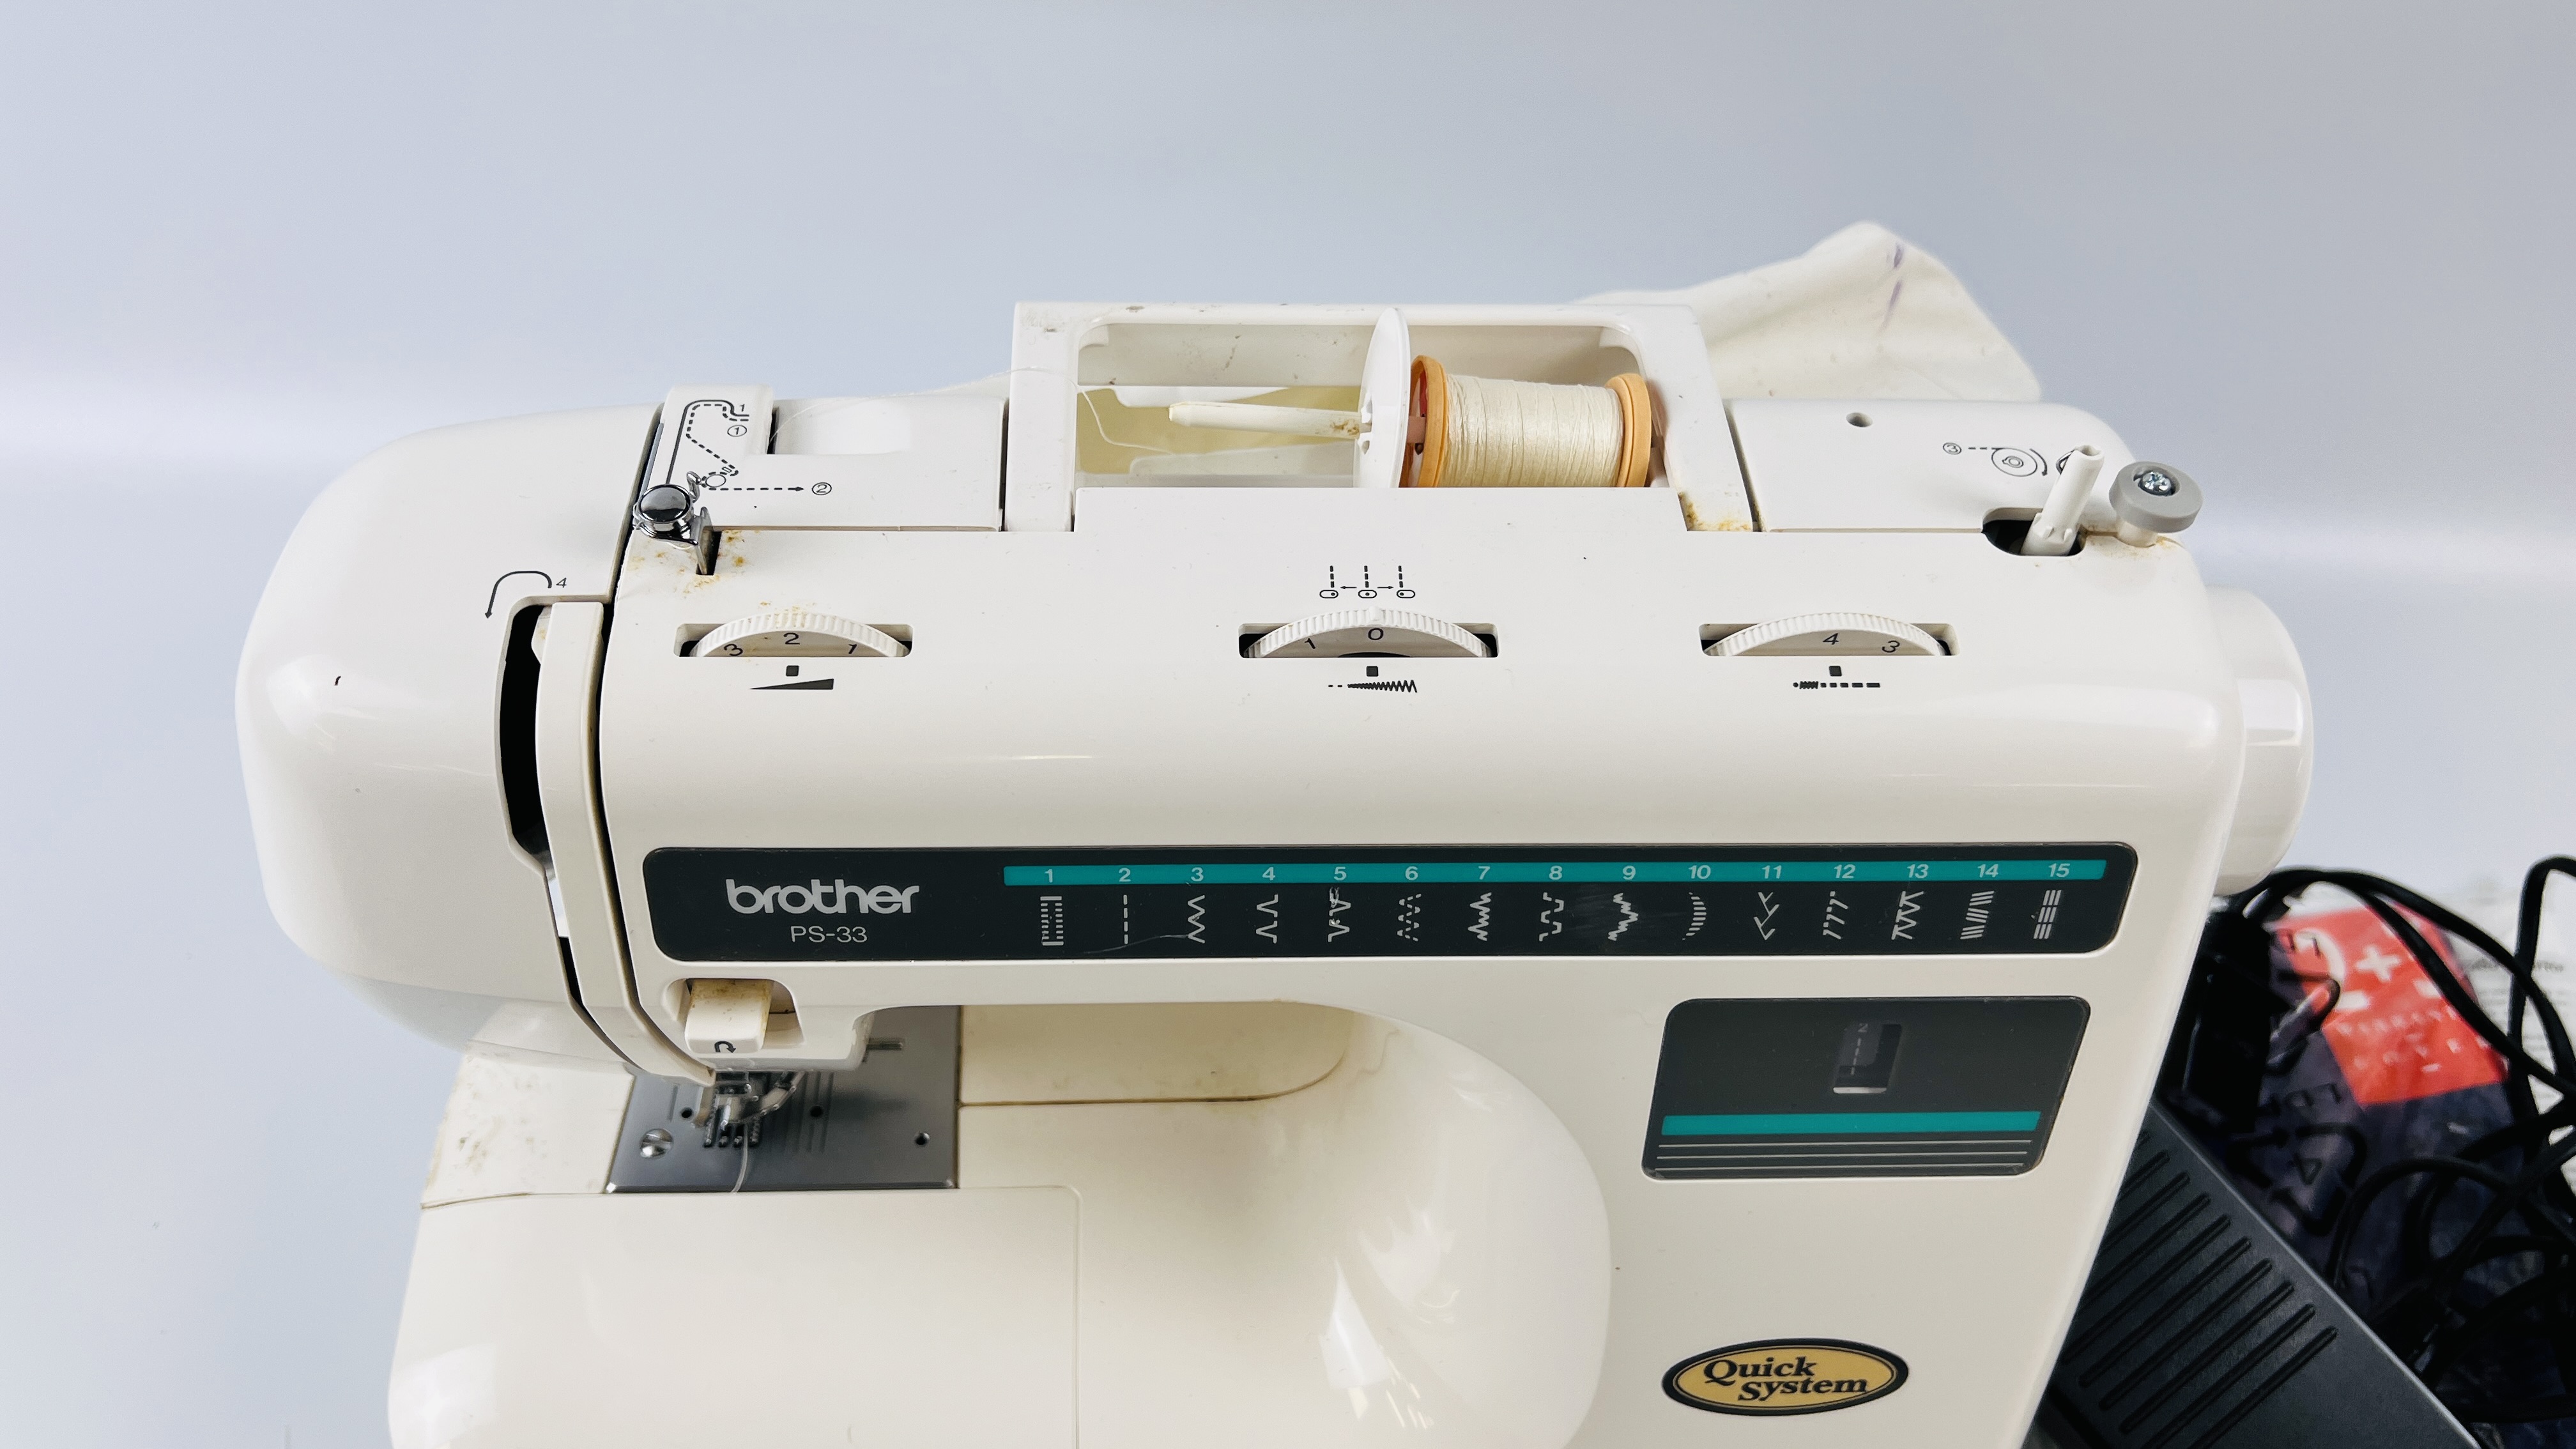 BROTHER PS-33 ELECTRIC QUICK SYSTEM SEWING MACHINE WITH FOOT PEDAL AND INSTRUCTIONS - SOLD AS SEEN. - Image 3 of 6